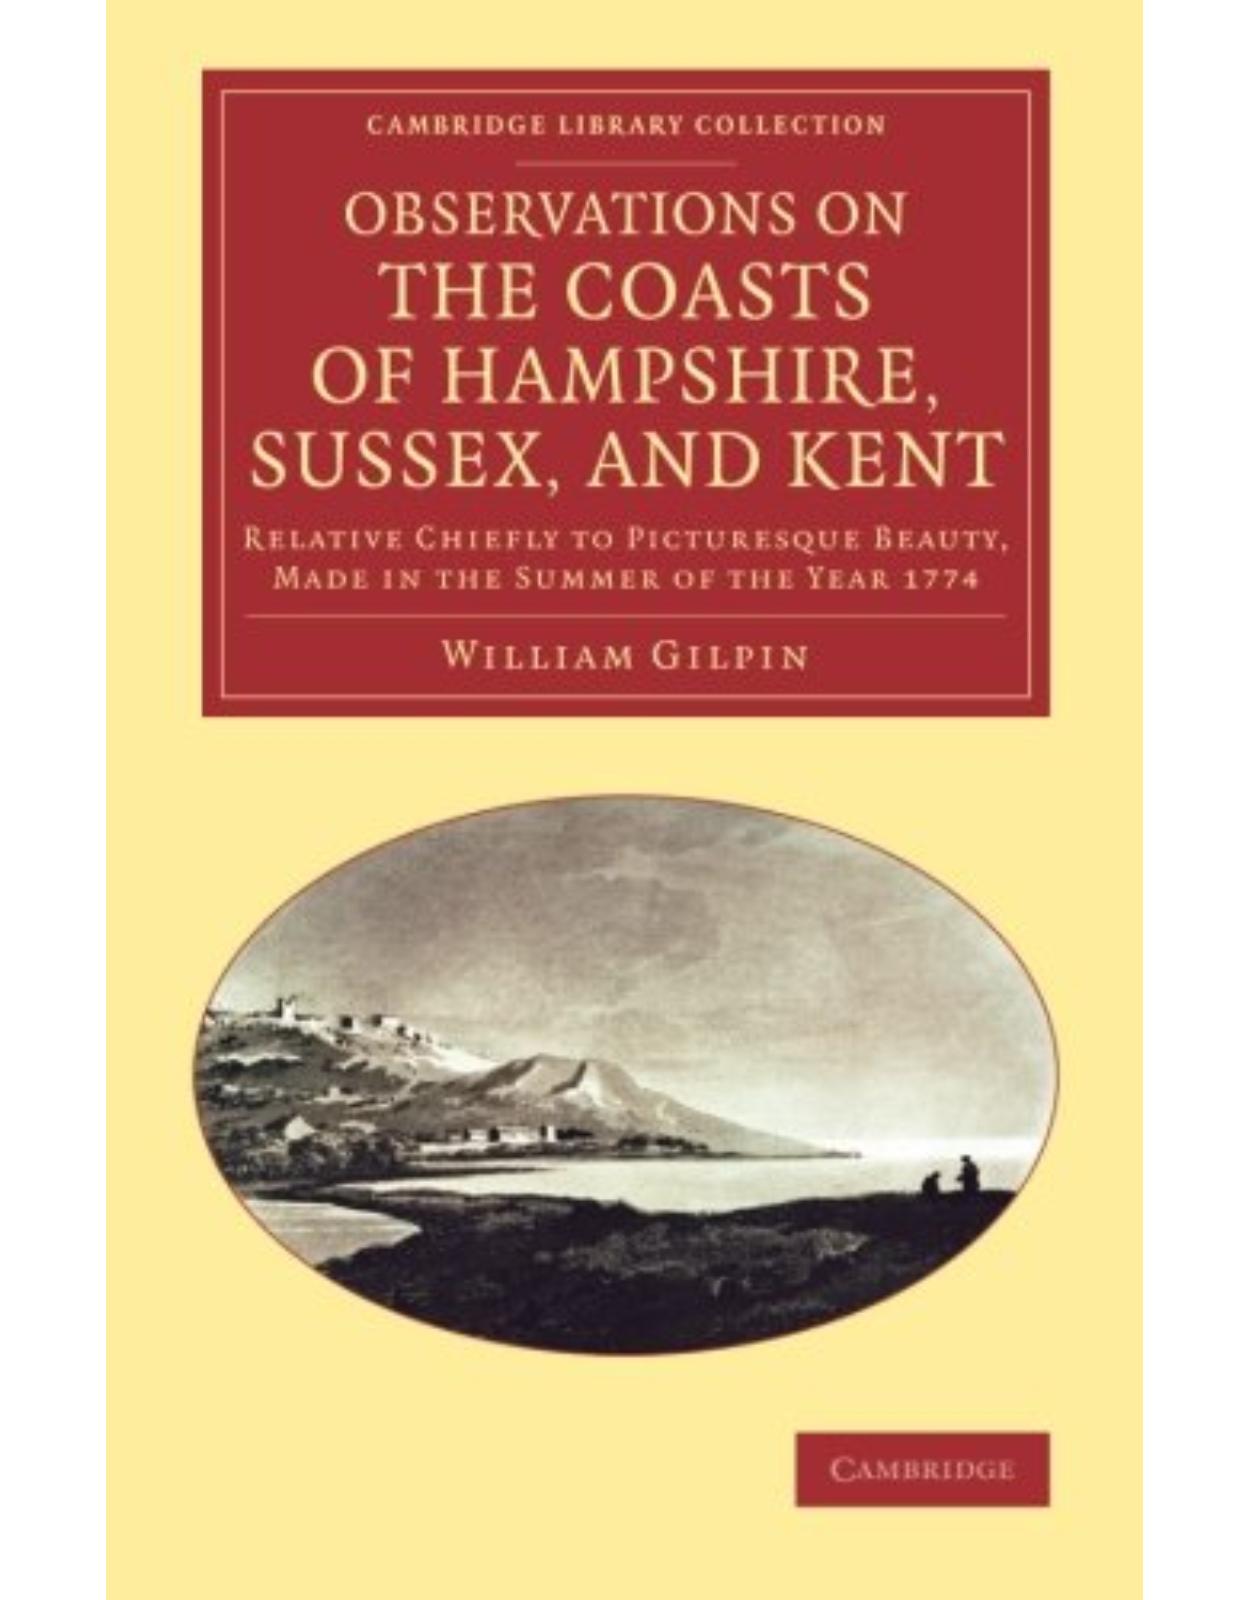 Observations on the Coasts of Hampshire, Sussex, and Kent: Relative Chiefly to Picturesque Beauty, Made in the Summer of the Year 1774 (Cambridge Library Collection - Art and Architecture)